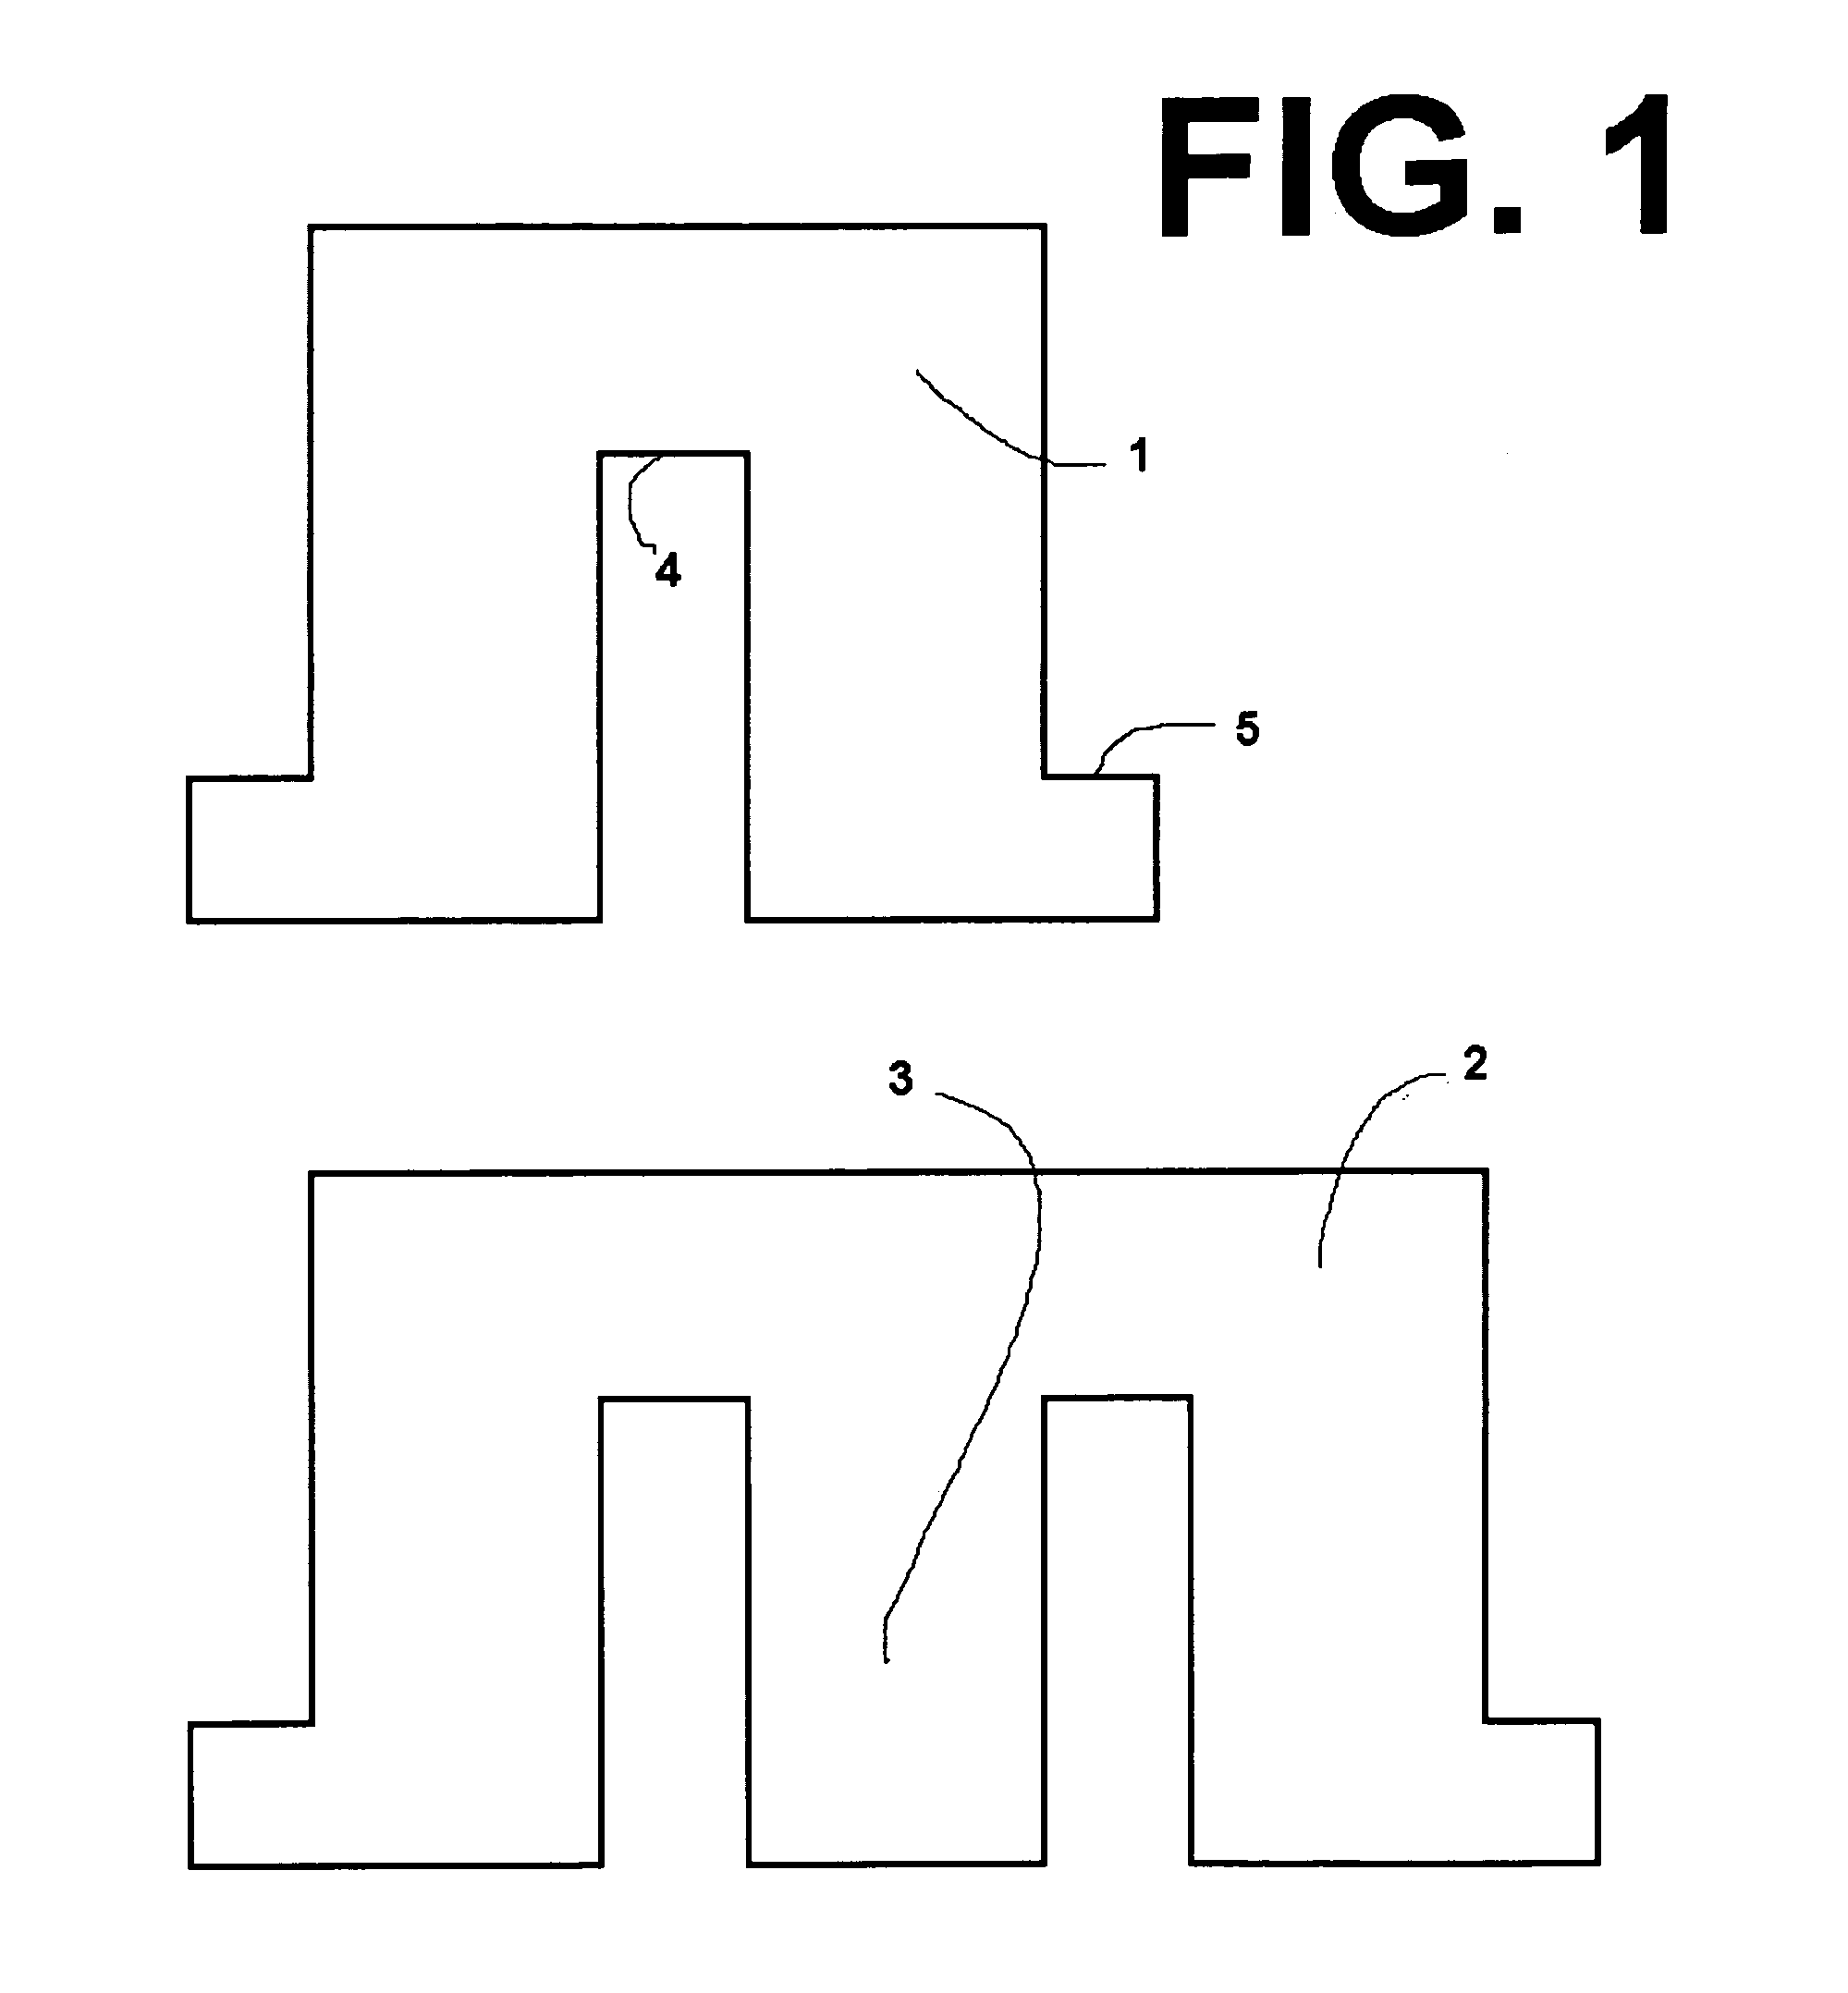 Seismic base isloation and energy dissipation device